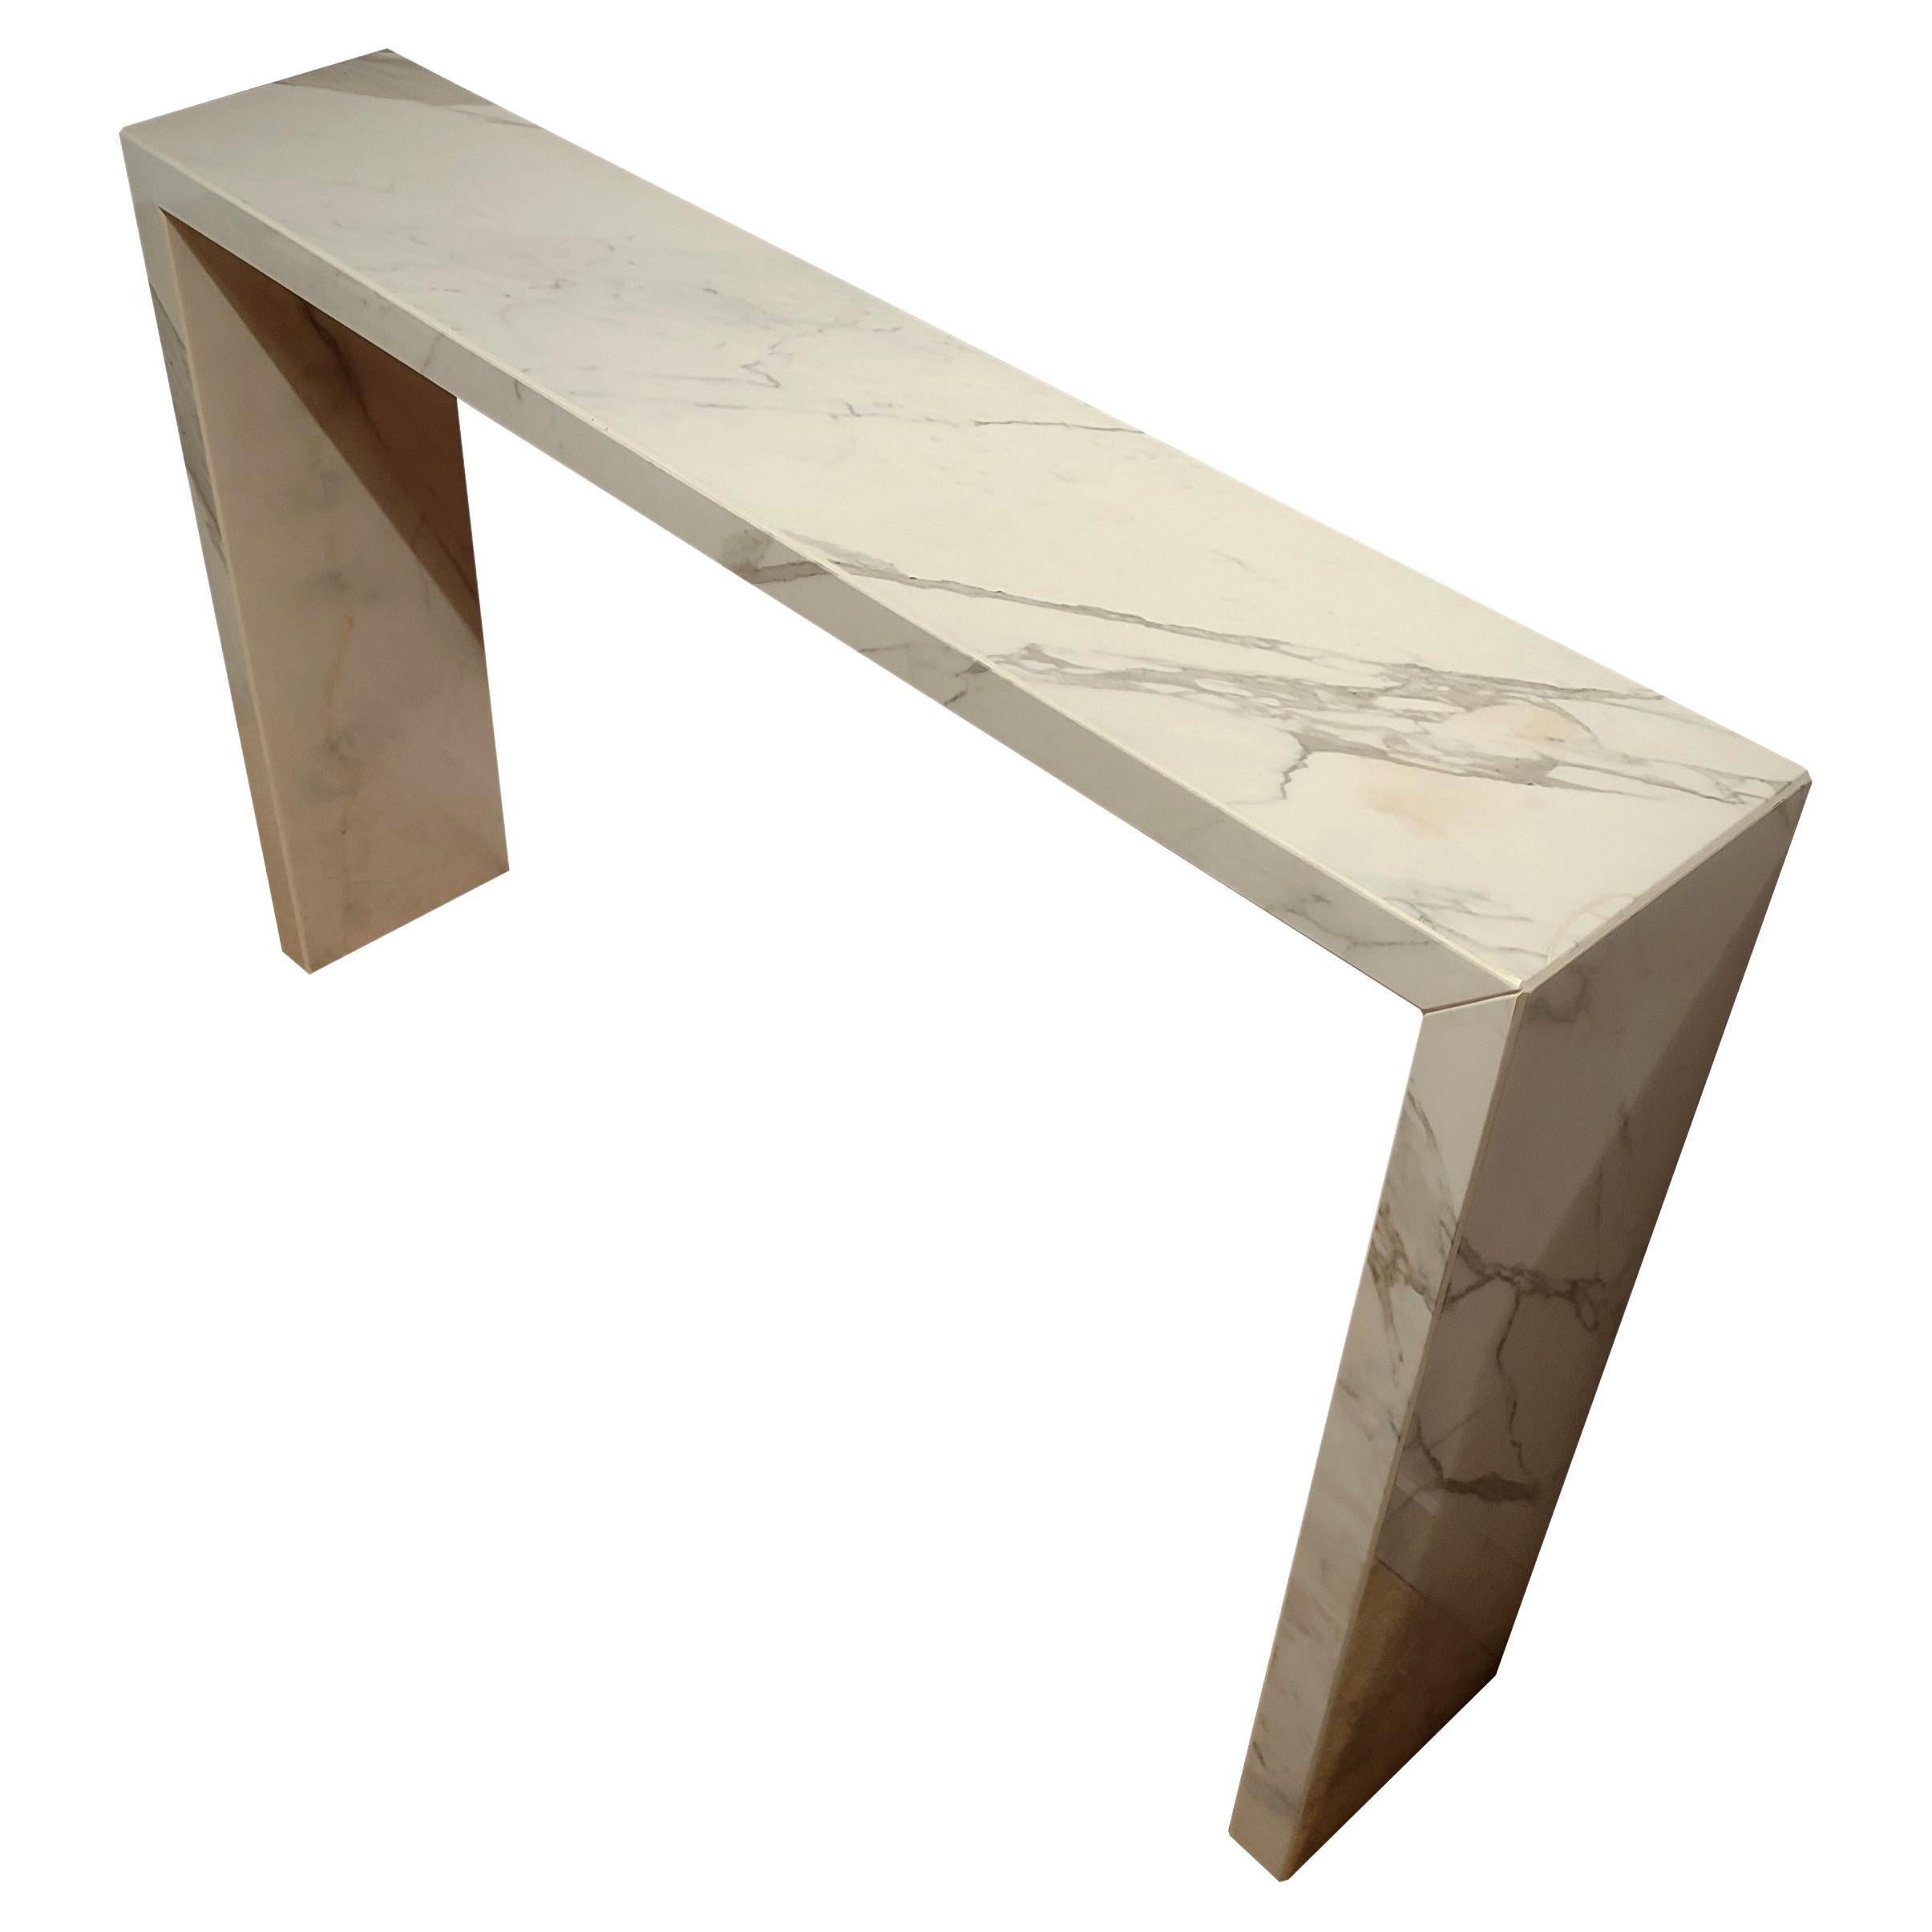 Calacatta Italy Marble Console Table Handmade in Spain Contemporary Design Lux